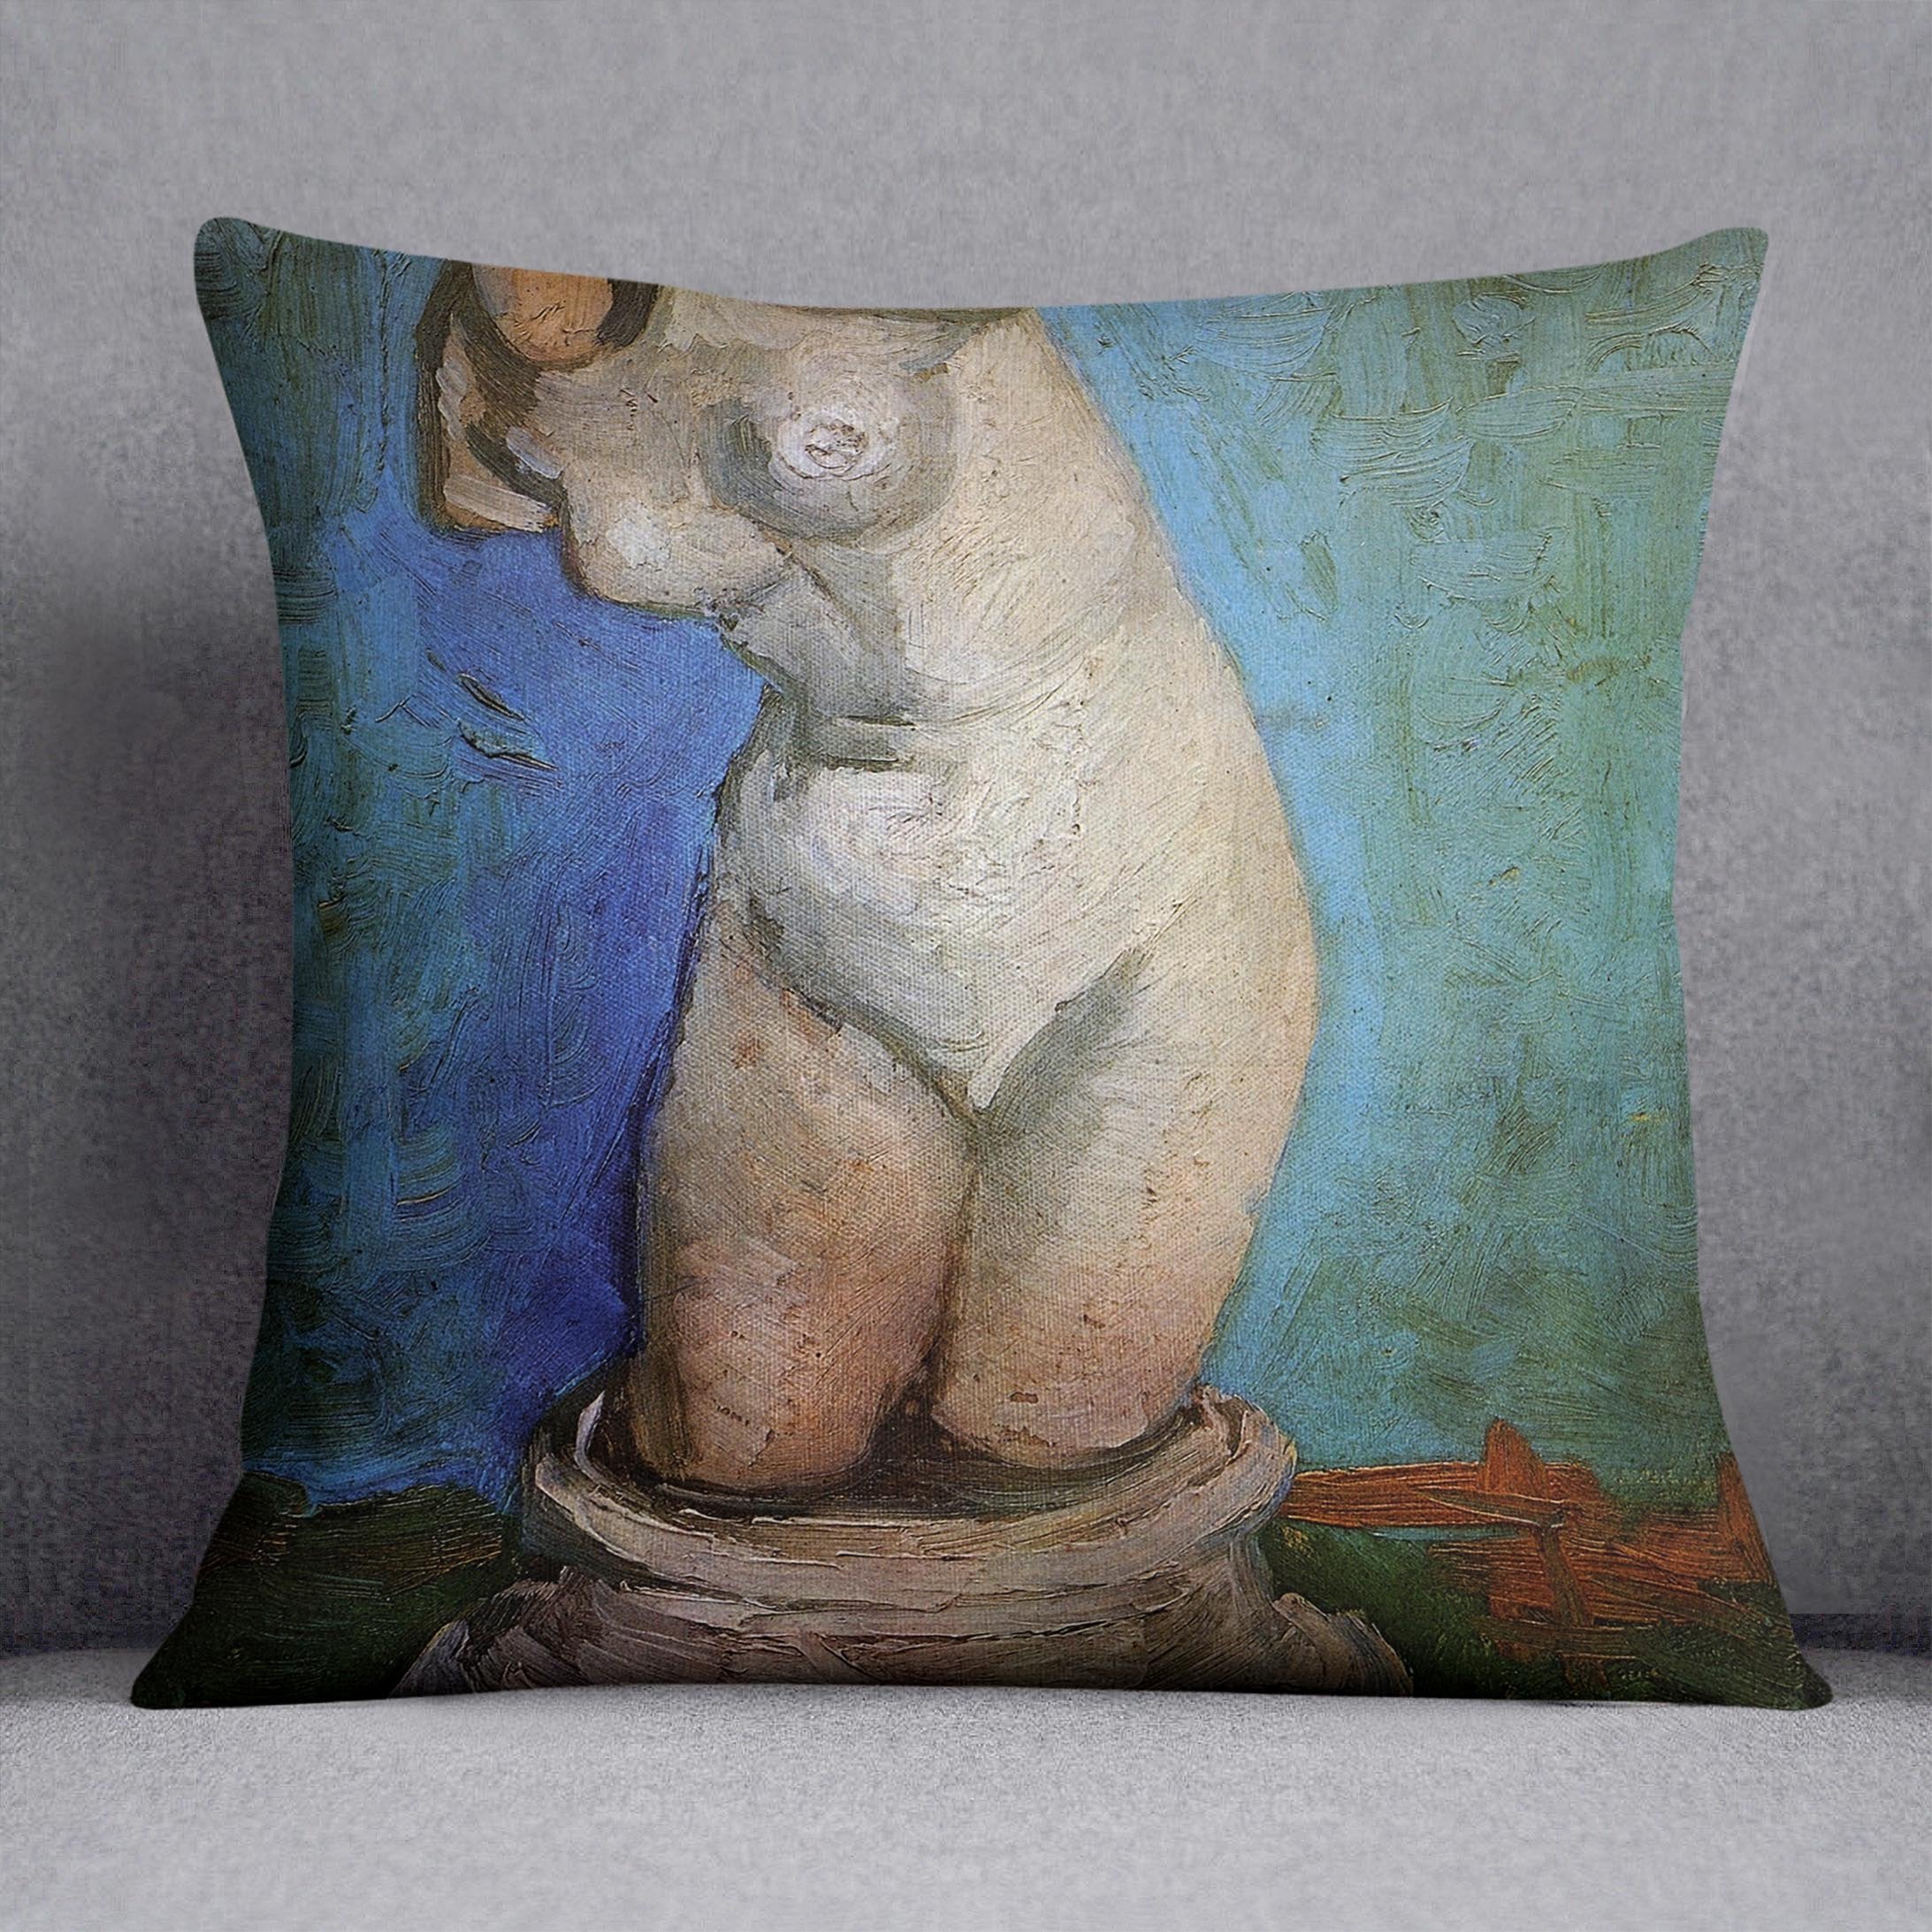 Plaster Statuette of a Female Torso 2 by Van Gogh Throw Pillow